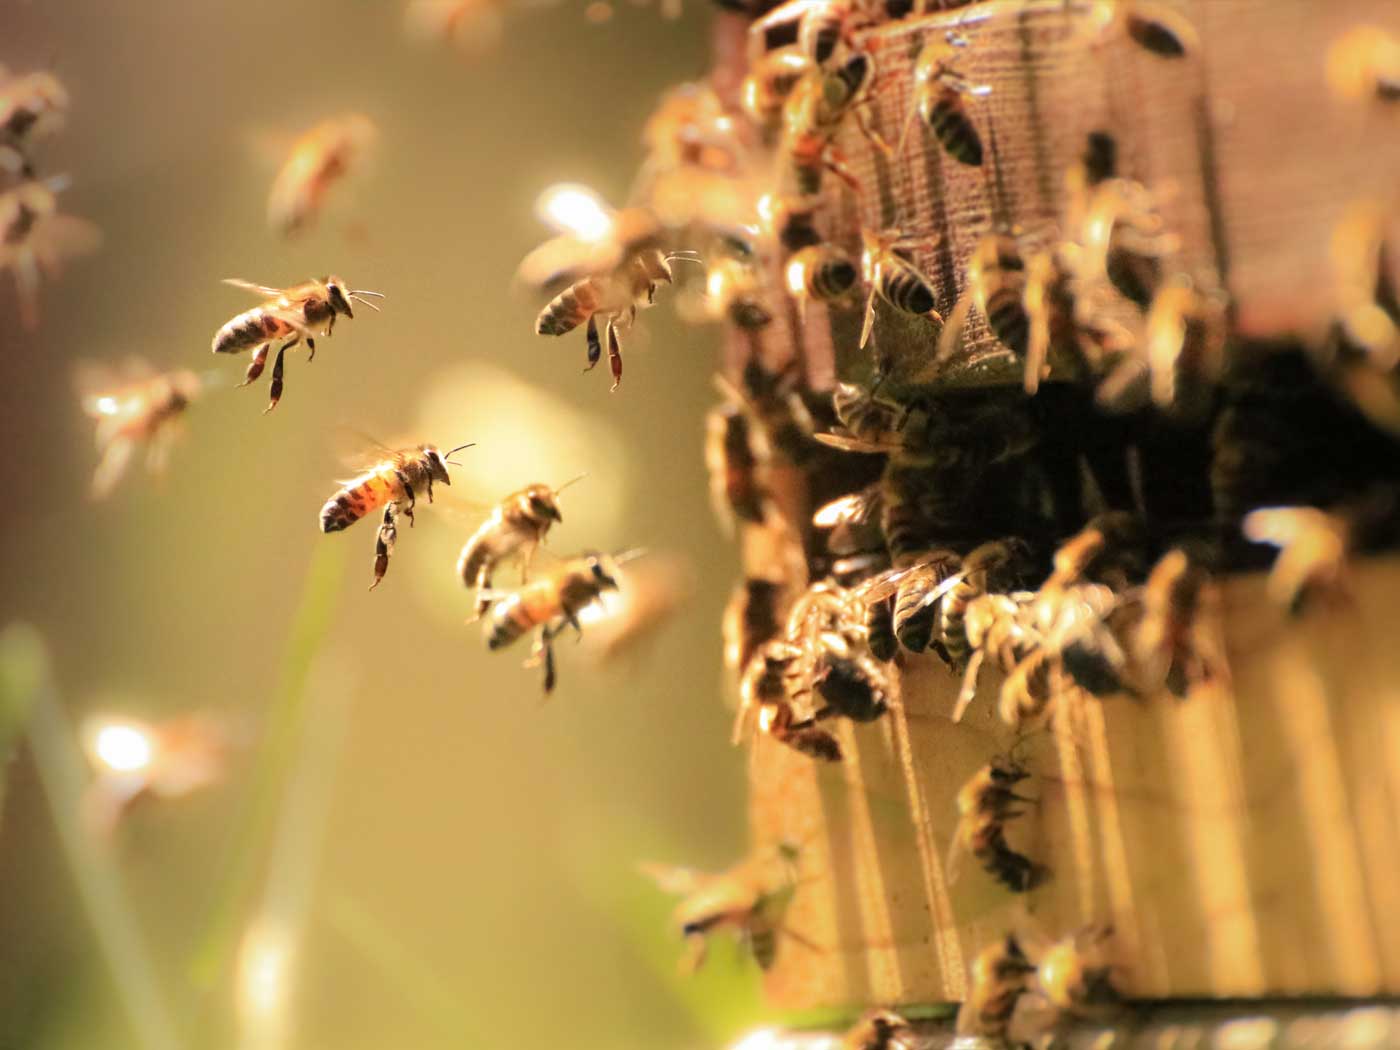 Honeybees: How Sweet It Is, Again  The Institute for Creation Research